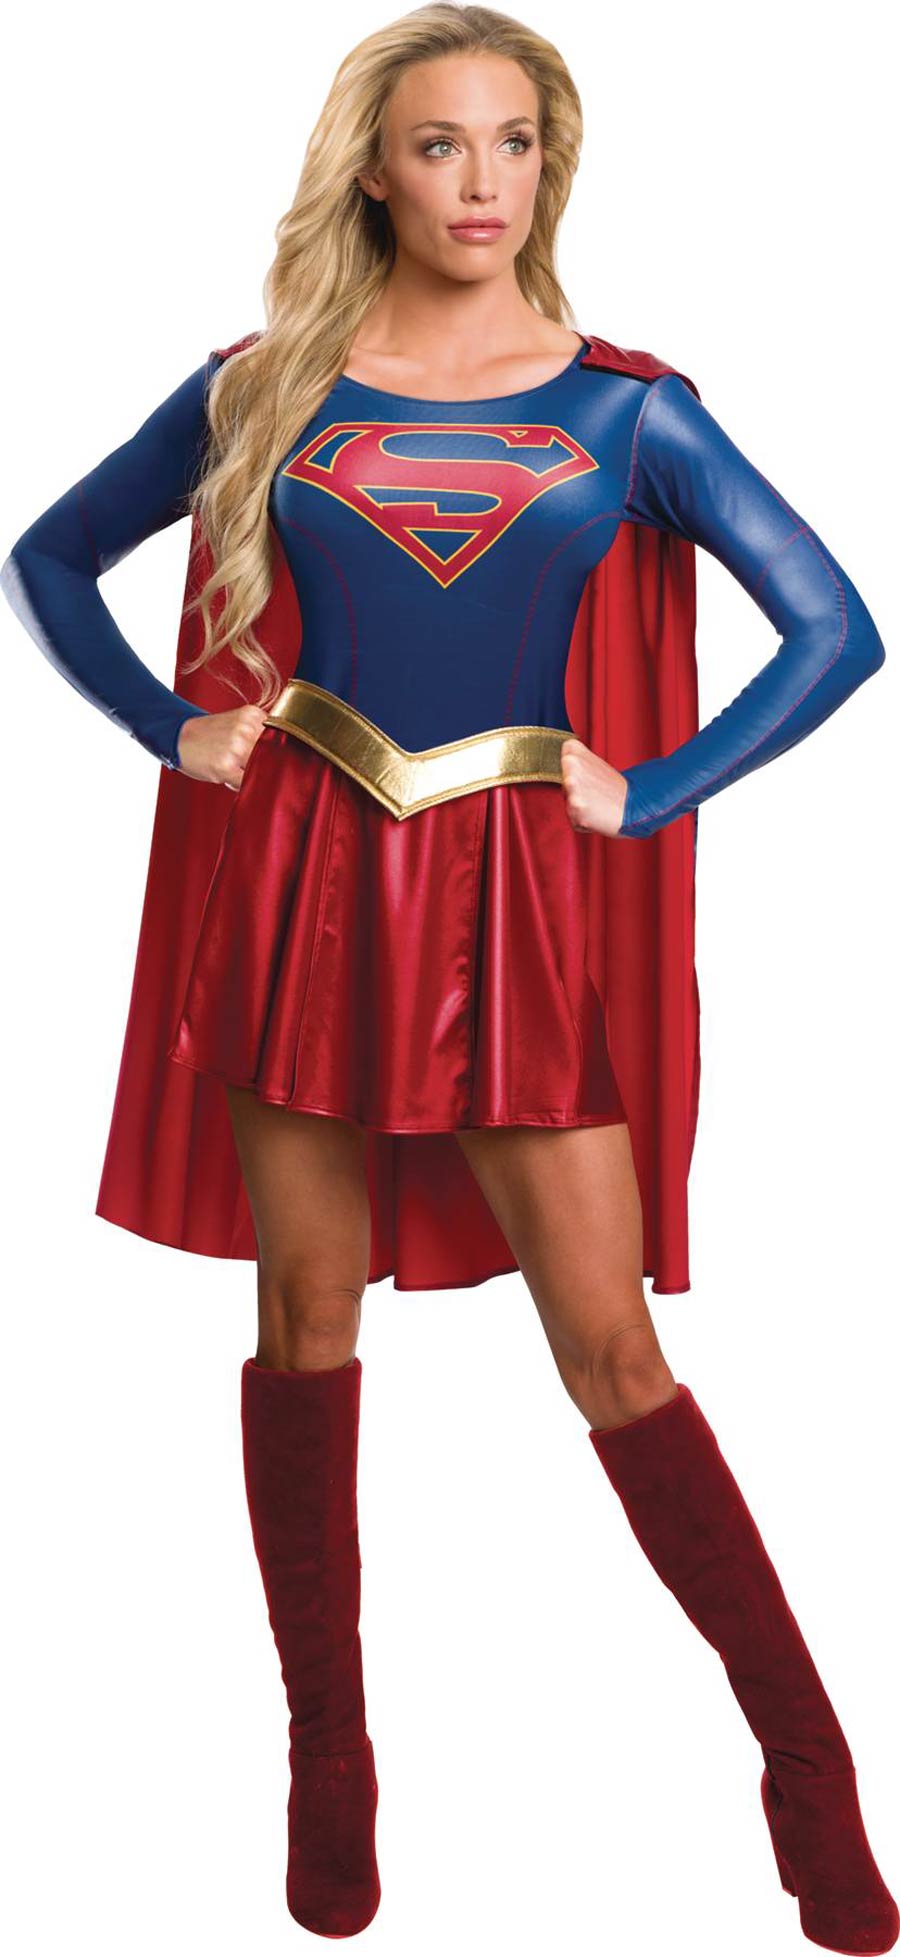 DC Supergirl TV Series Adult Costume Small